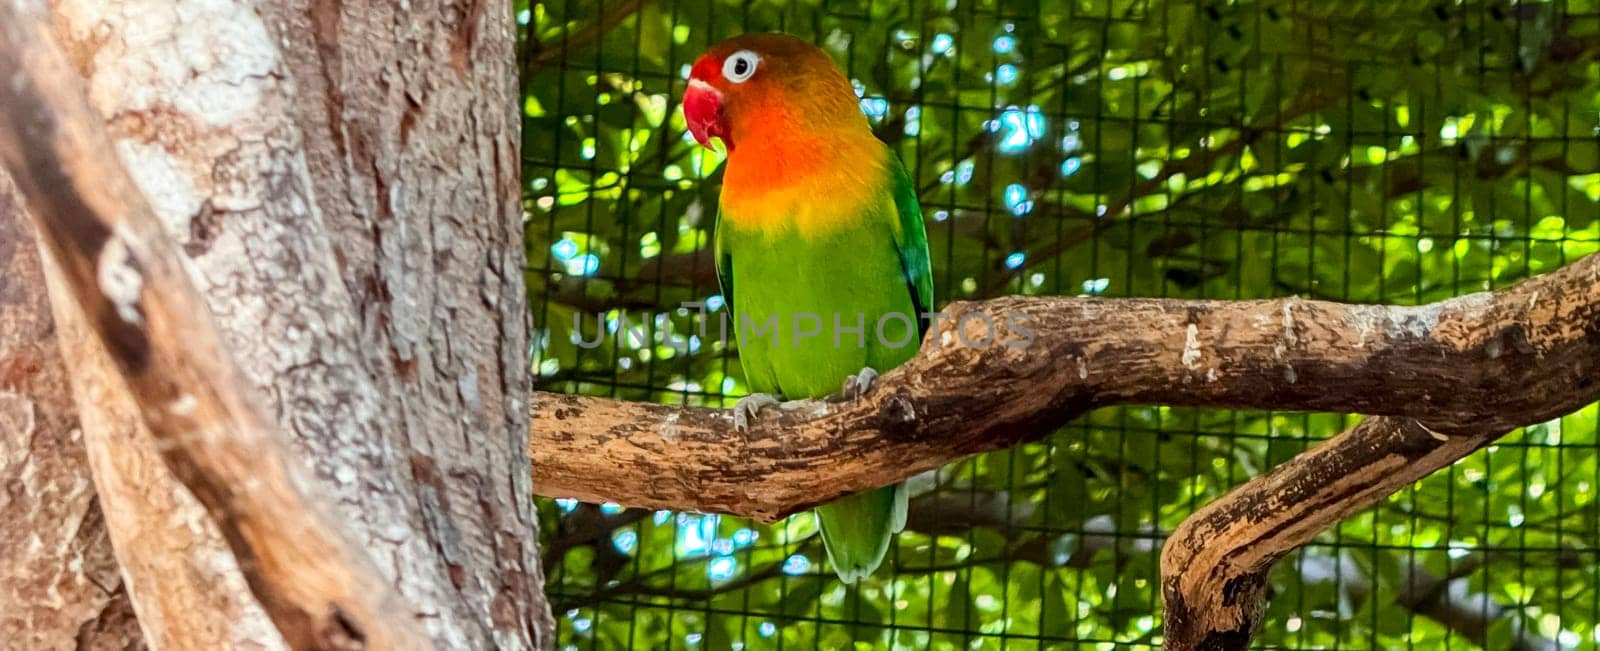 lovebirds are perched on a tree branch. This bird which is used as a symbol of true love has the scientific name Agapornis fischeri, domestic birds